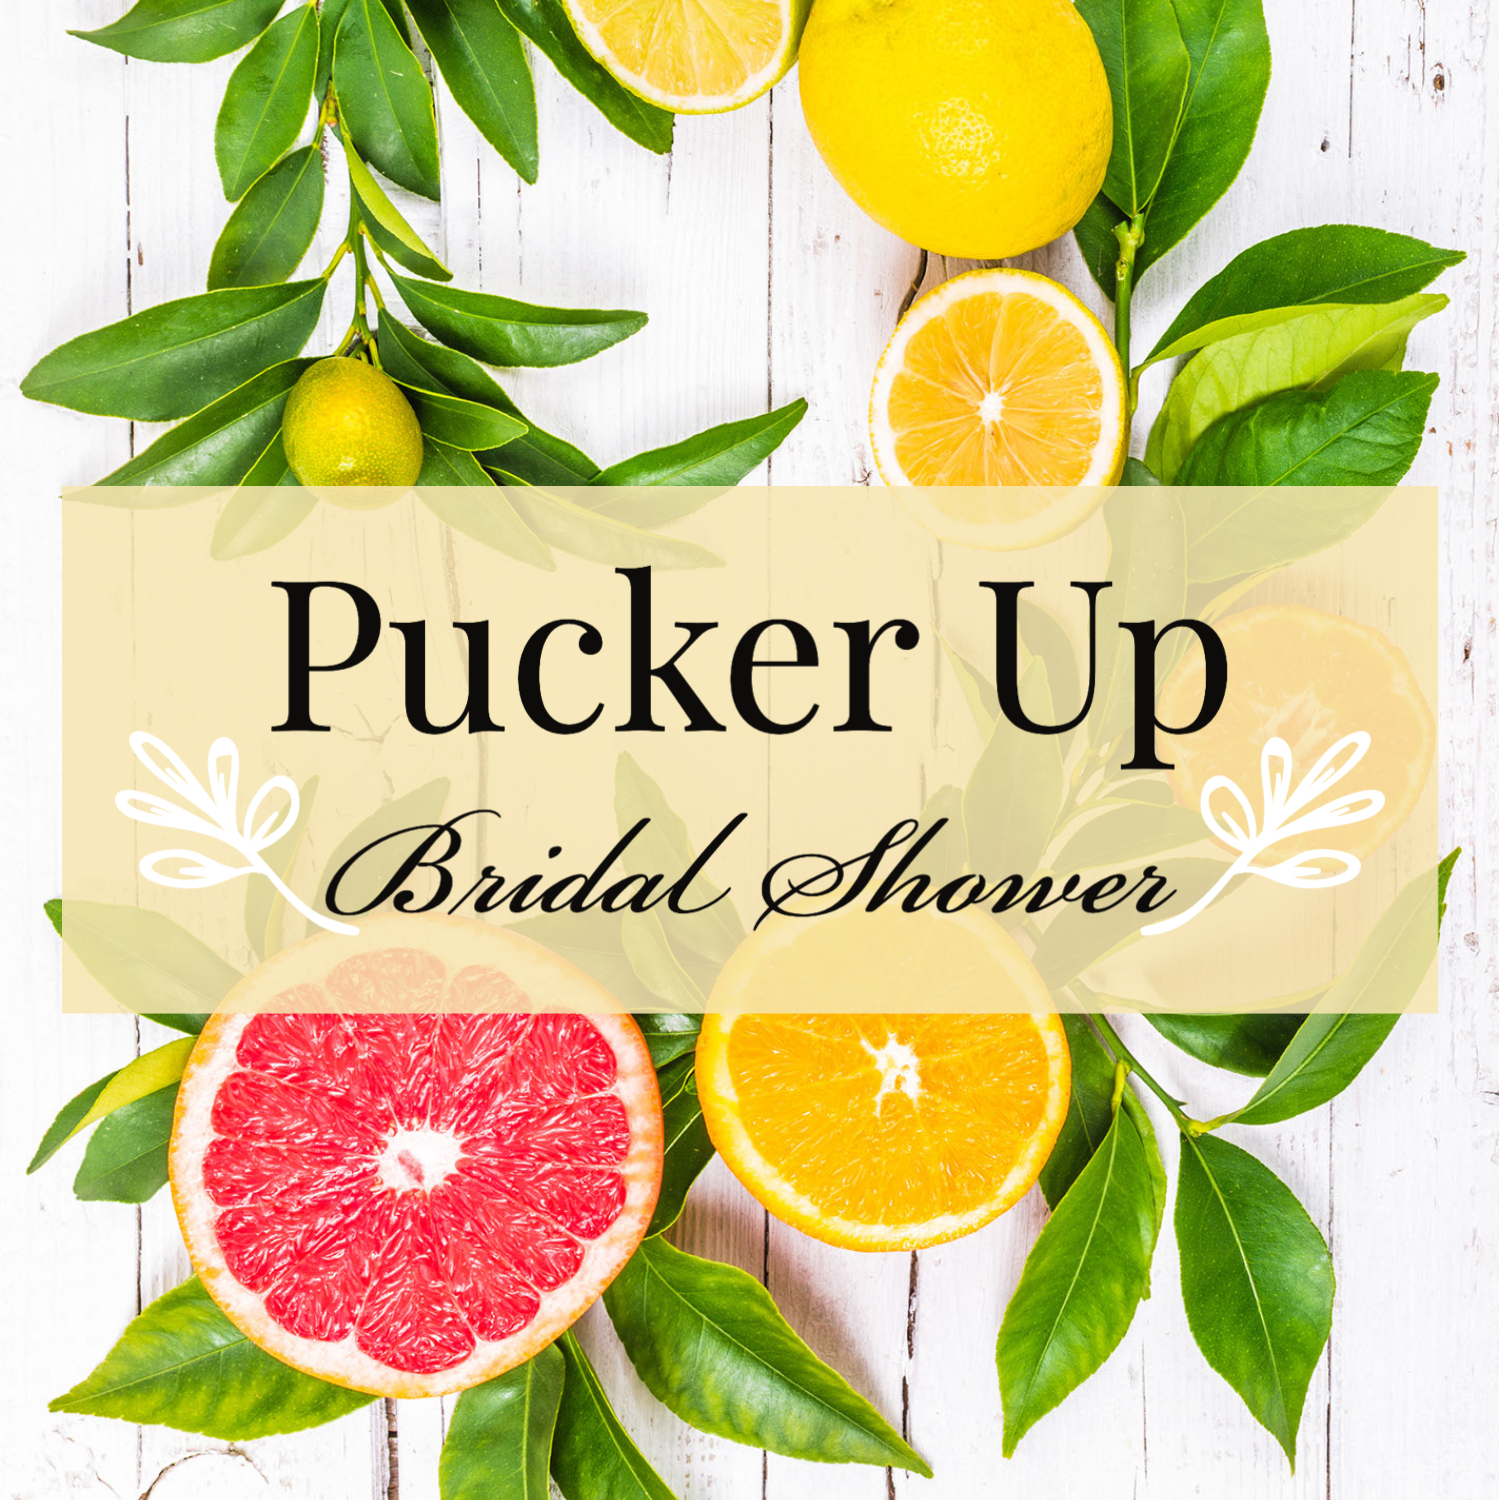 “Pucker Up” for a Citrus-Kissed Bridal Shower